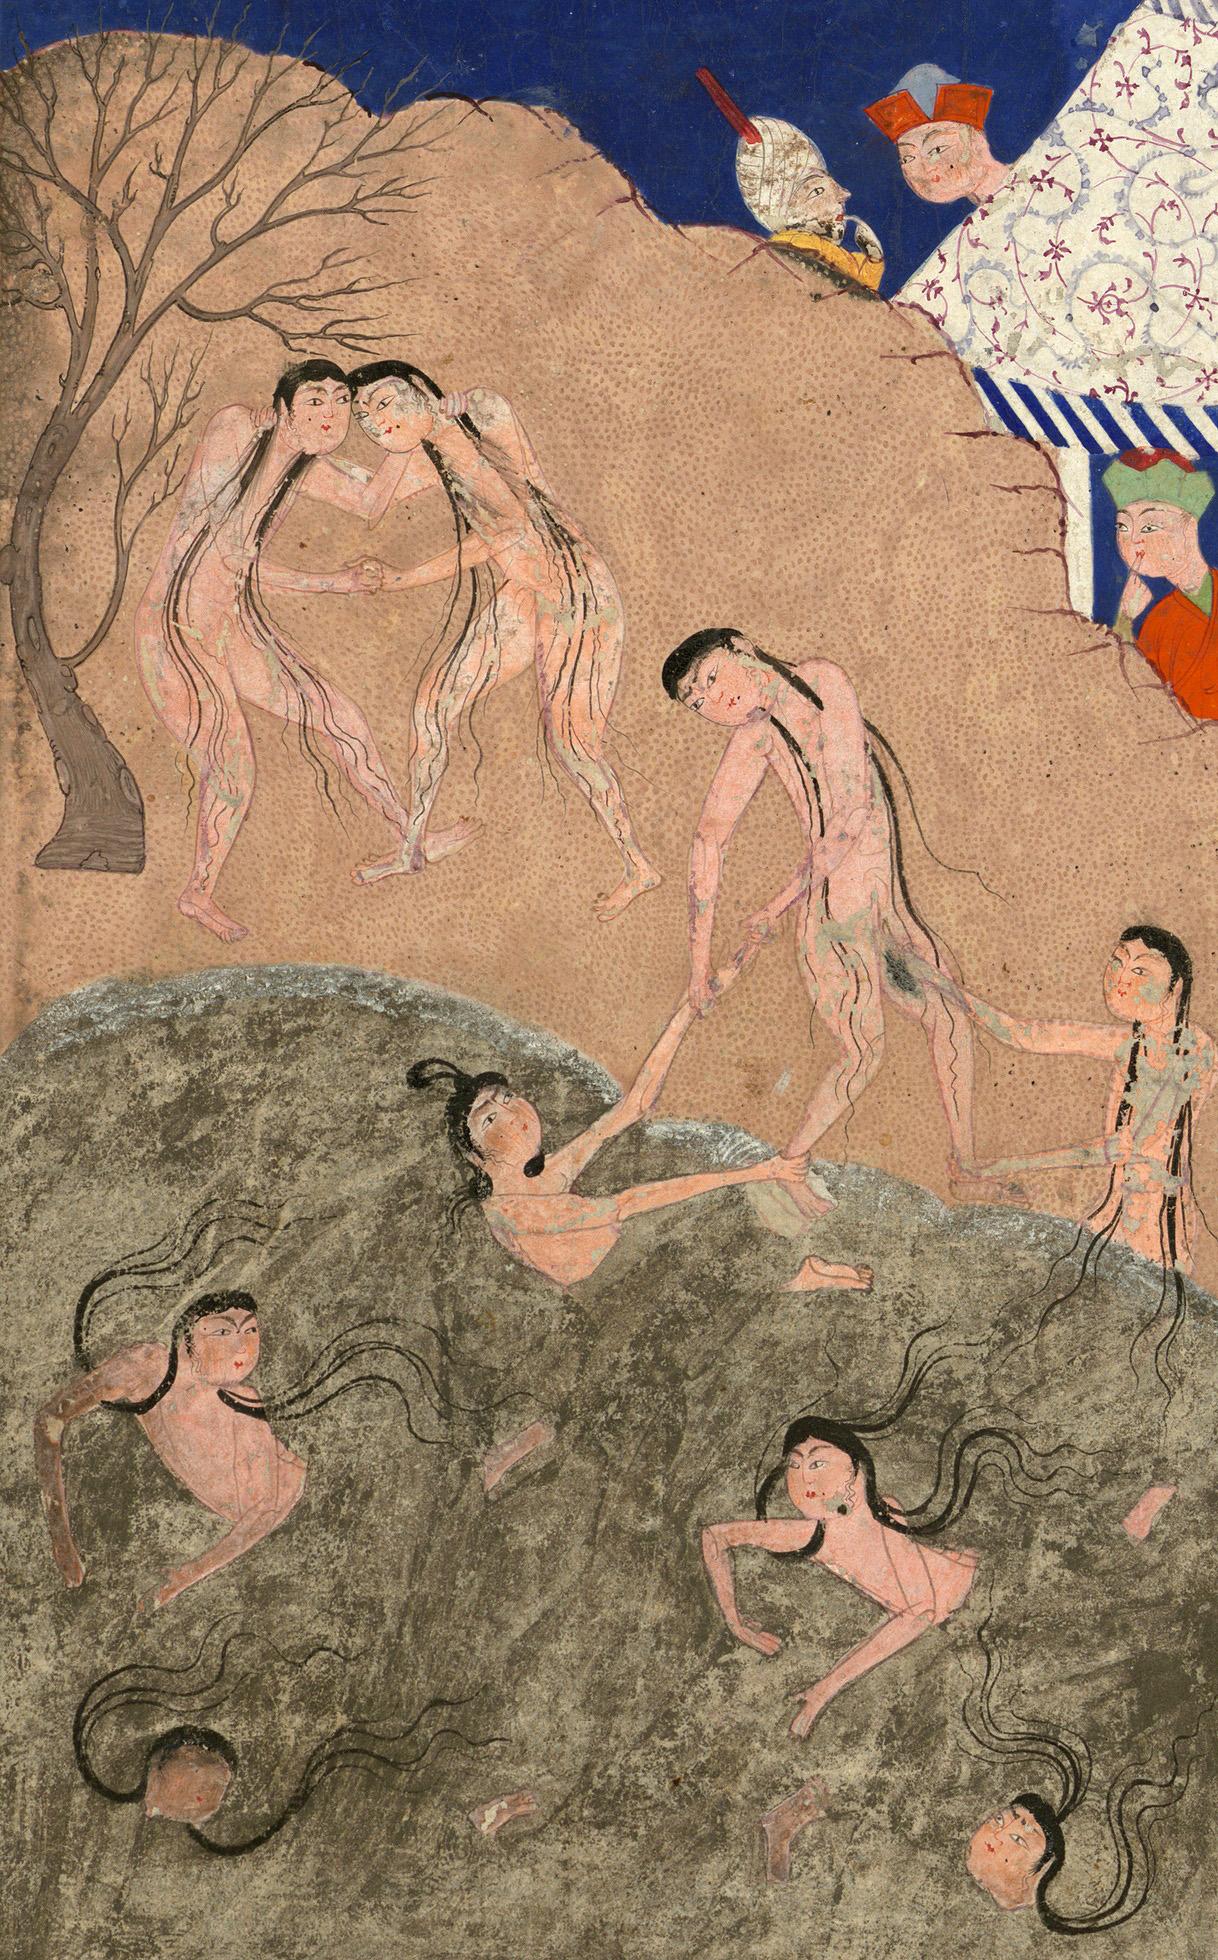 Alexander the Great watching naked girls swim in the Sea of China, illustrated scene from a copy of the Iskandarnameh (Book of Alexander), a narrative poem by Nizami Ganjavi. Iran, 1517.jpg